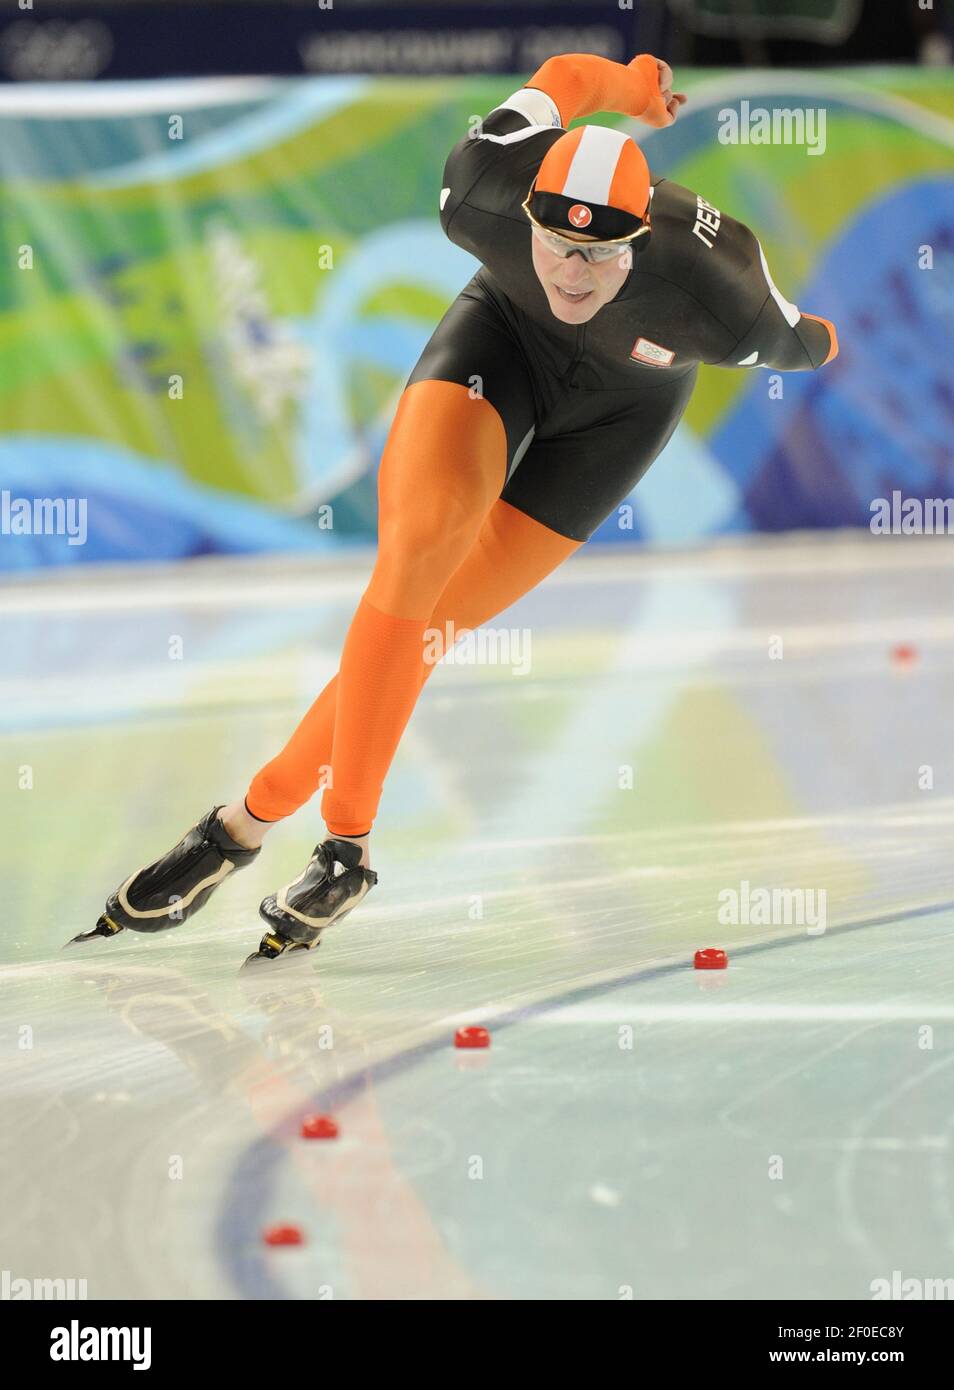 Dutch skater Sven Kramer competes in the men's 10,000-meter speed skating at the Richmond Olympic Oval in Richmond, B.C., Tuesday, February 23, 2010, during the Winter Olympics. (Photo by Gerry Kahrmann/Canwest News Service/TNS/Sipa USA) Stock Photo